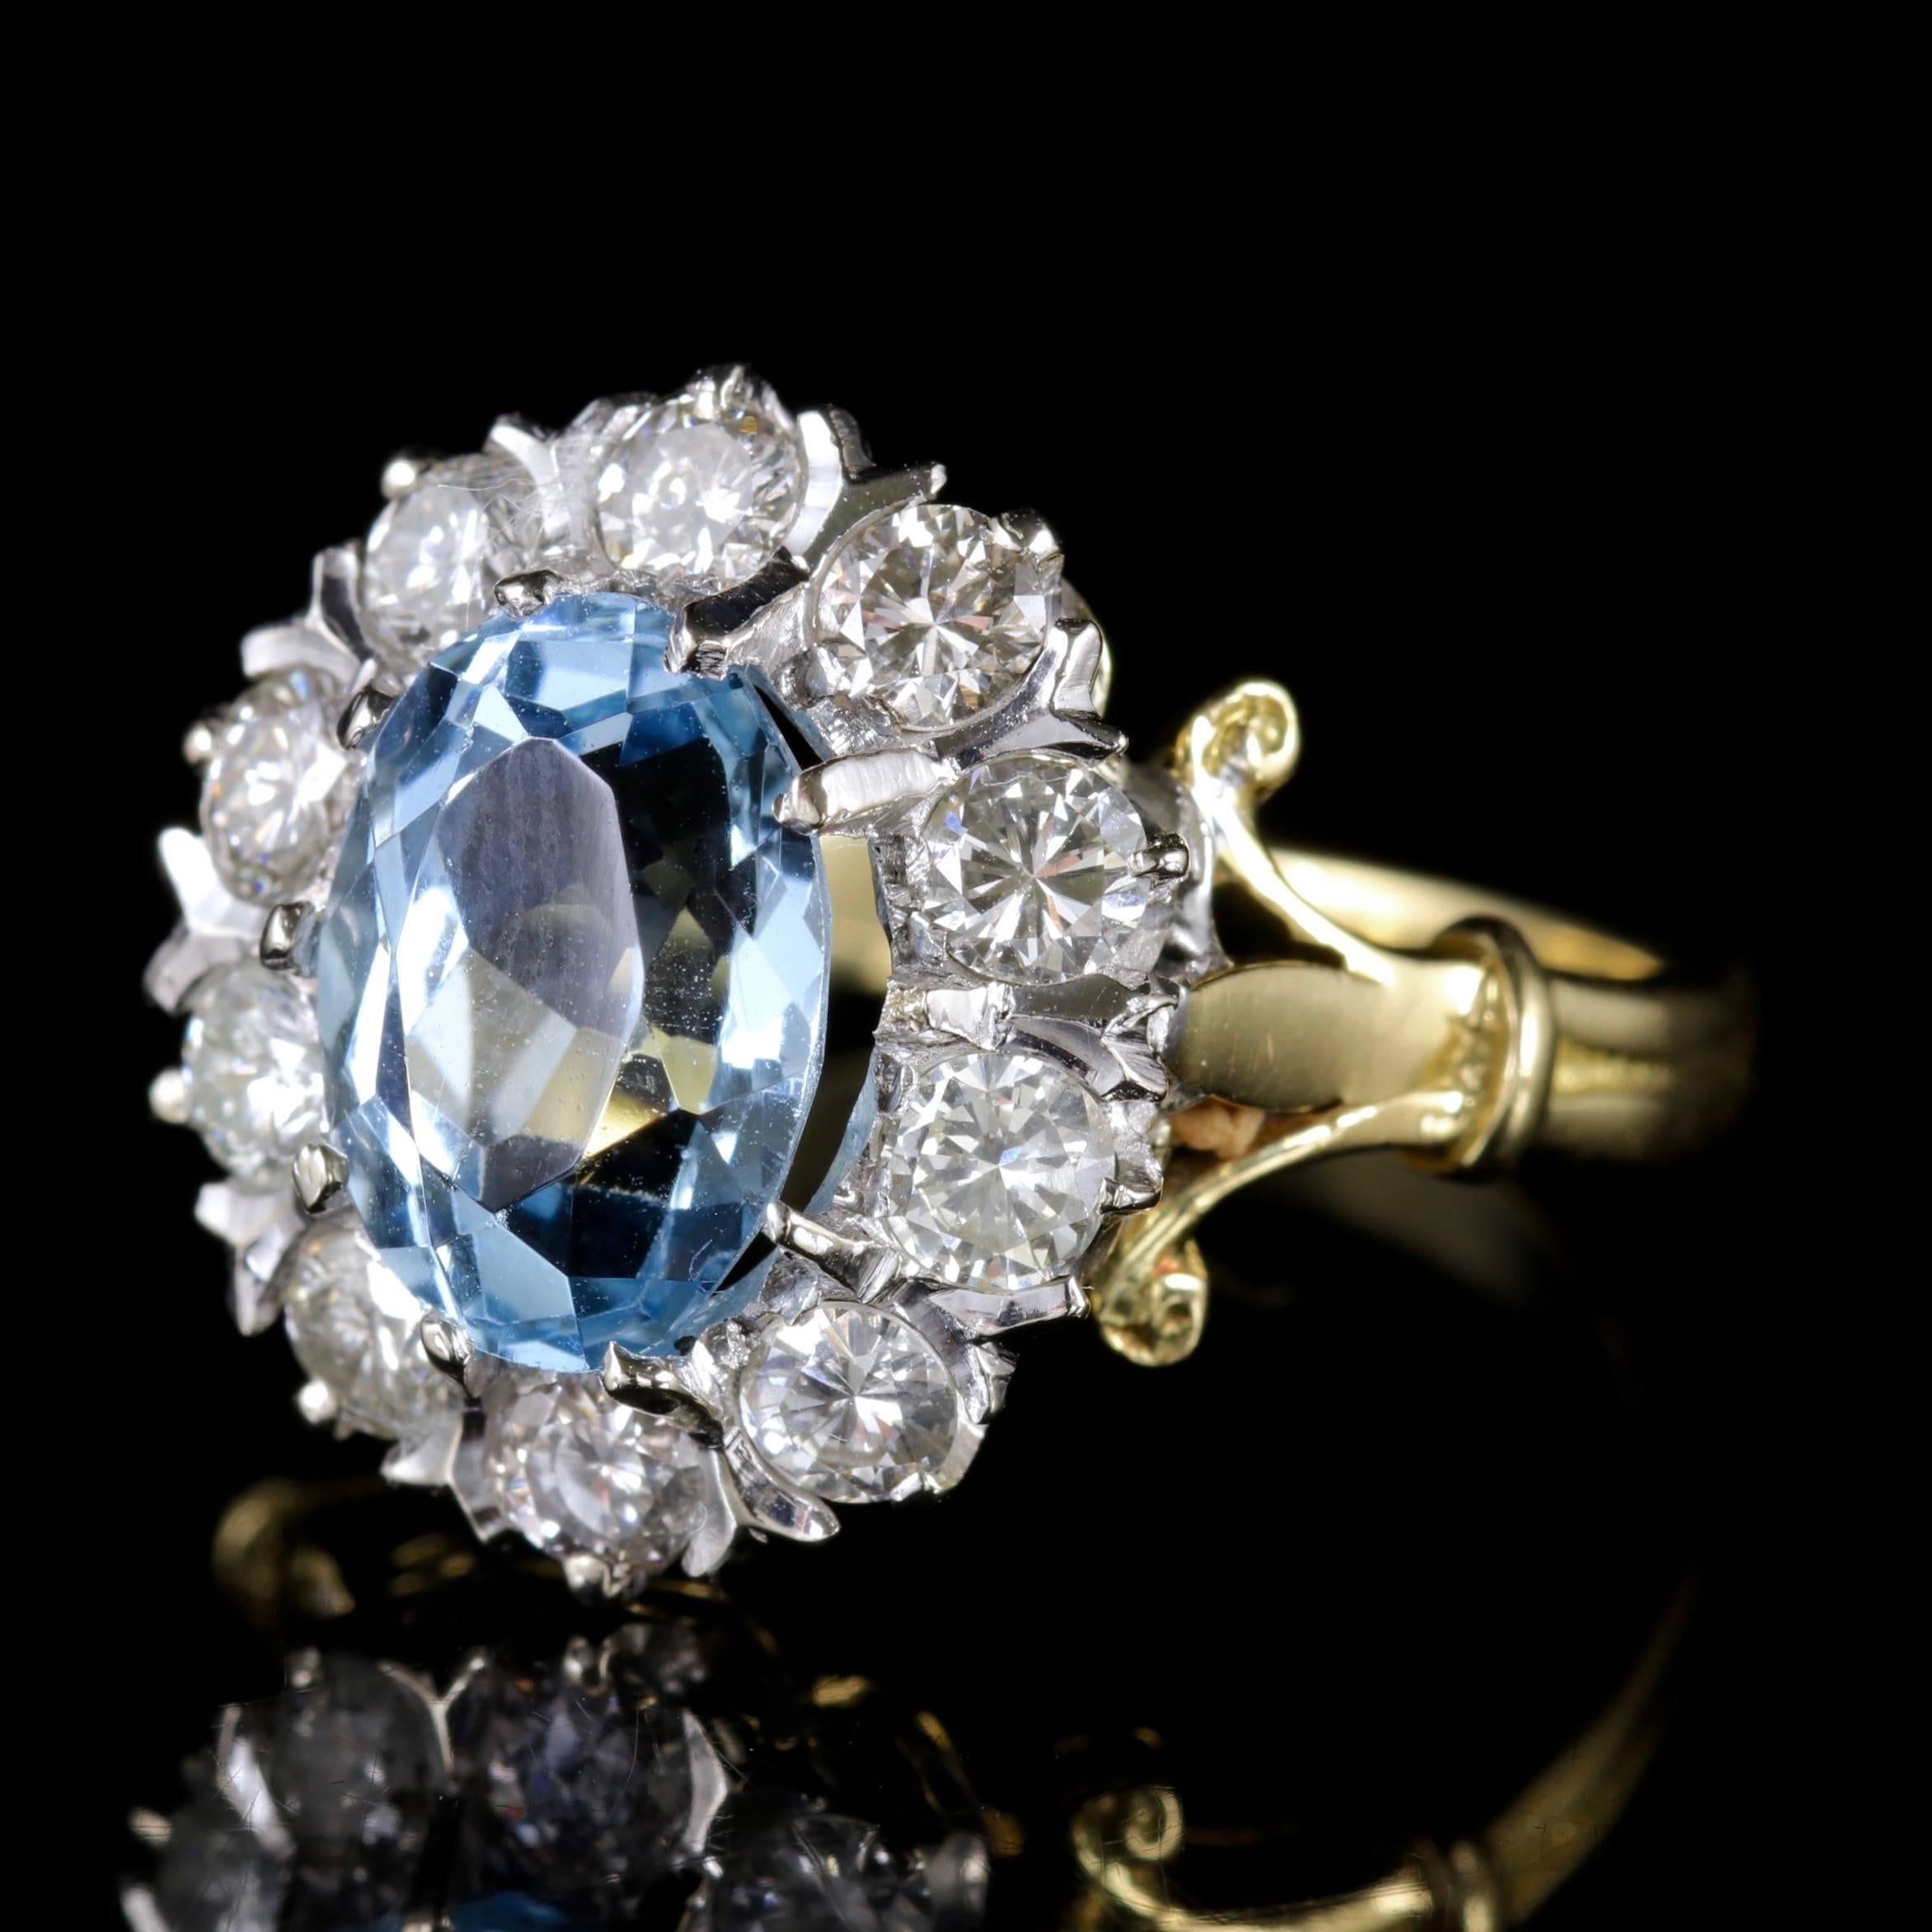 To read more please click continue reading below-

This magnificent antique Aquamarine and Diamond Cluster ring is Victorian Circa 1900. 

The beautiful Aquamarine is 3ct in size, surrounded by a halo of brilliant cut Diamonds which are 0.08ct each